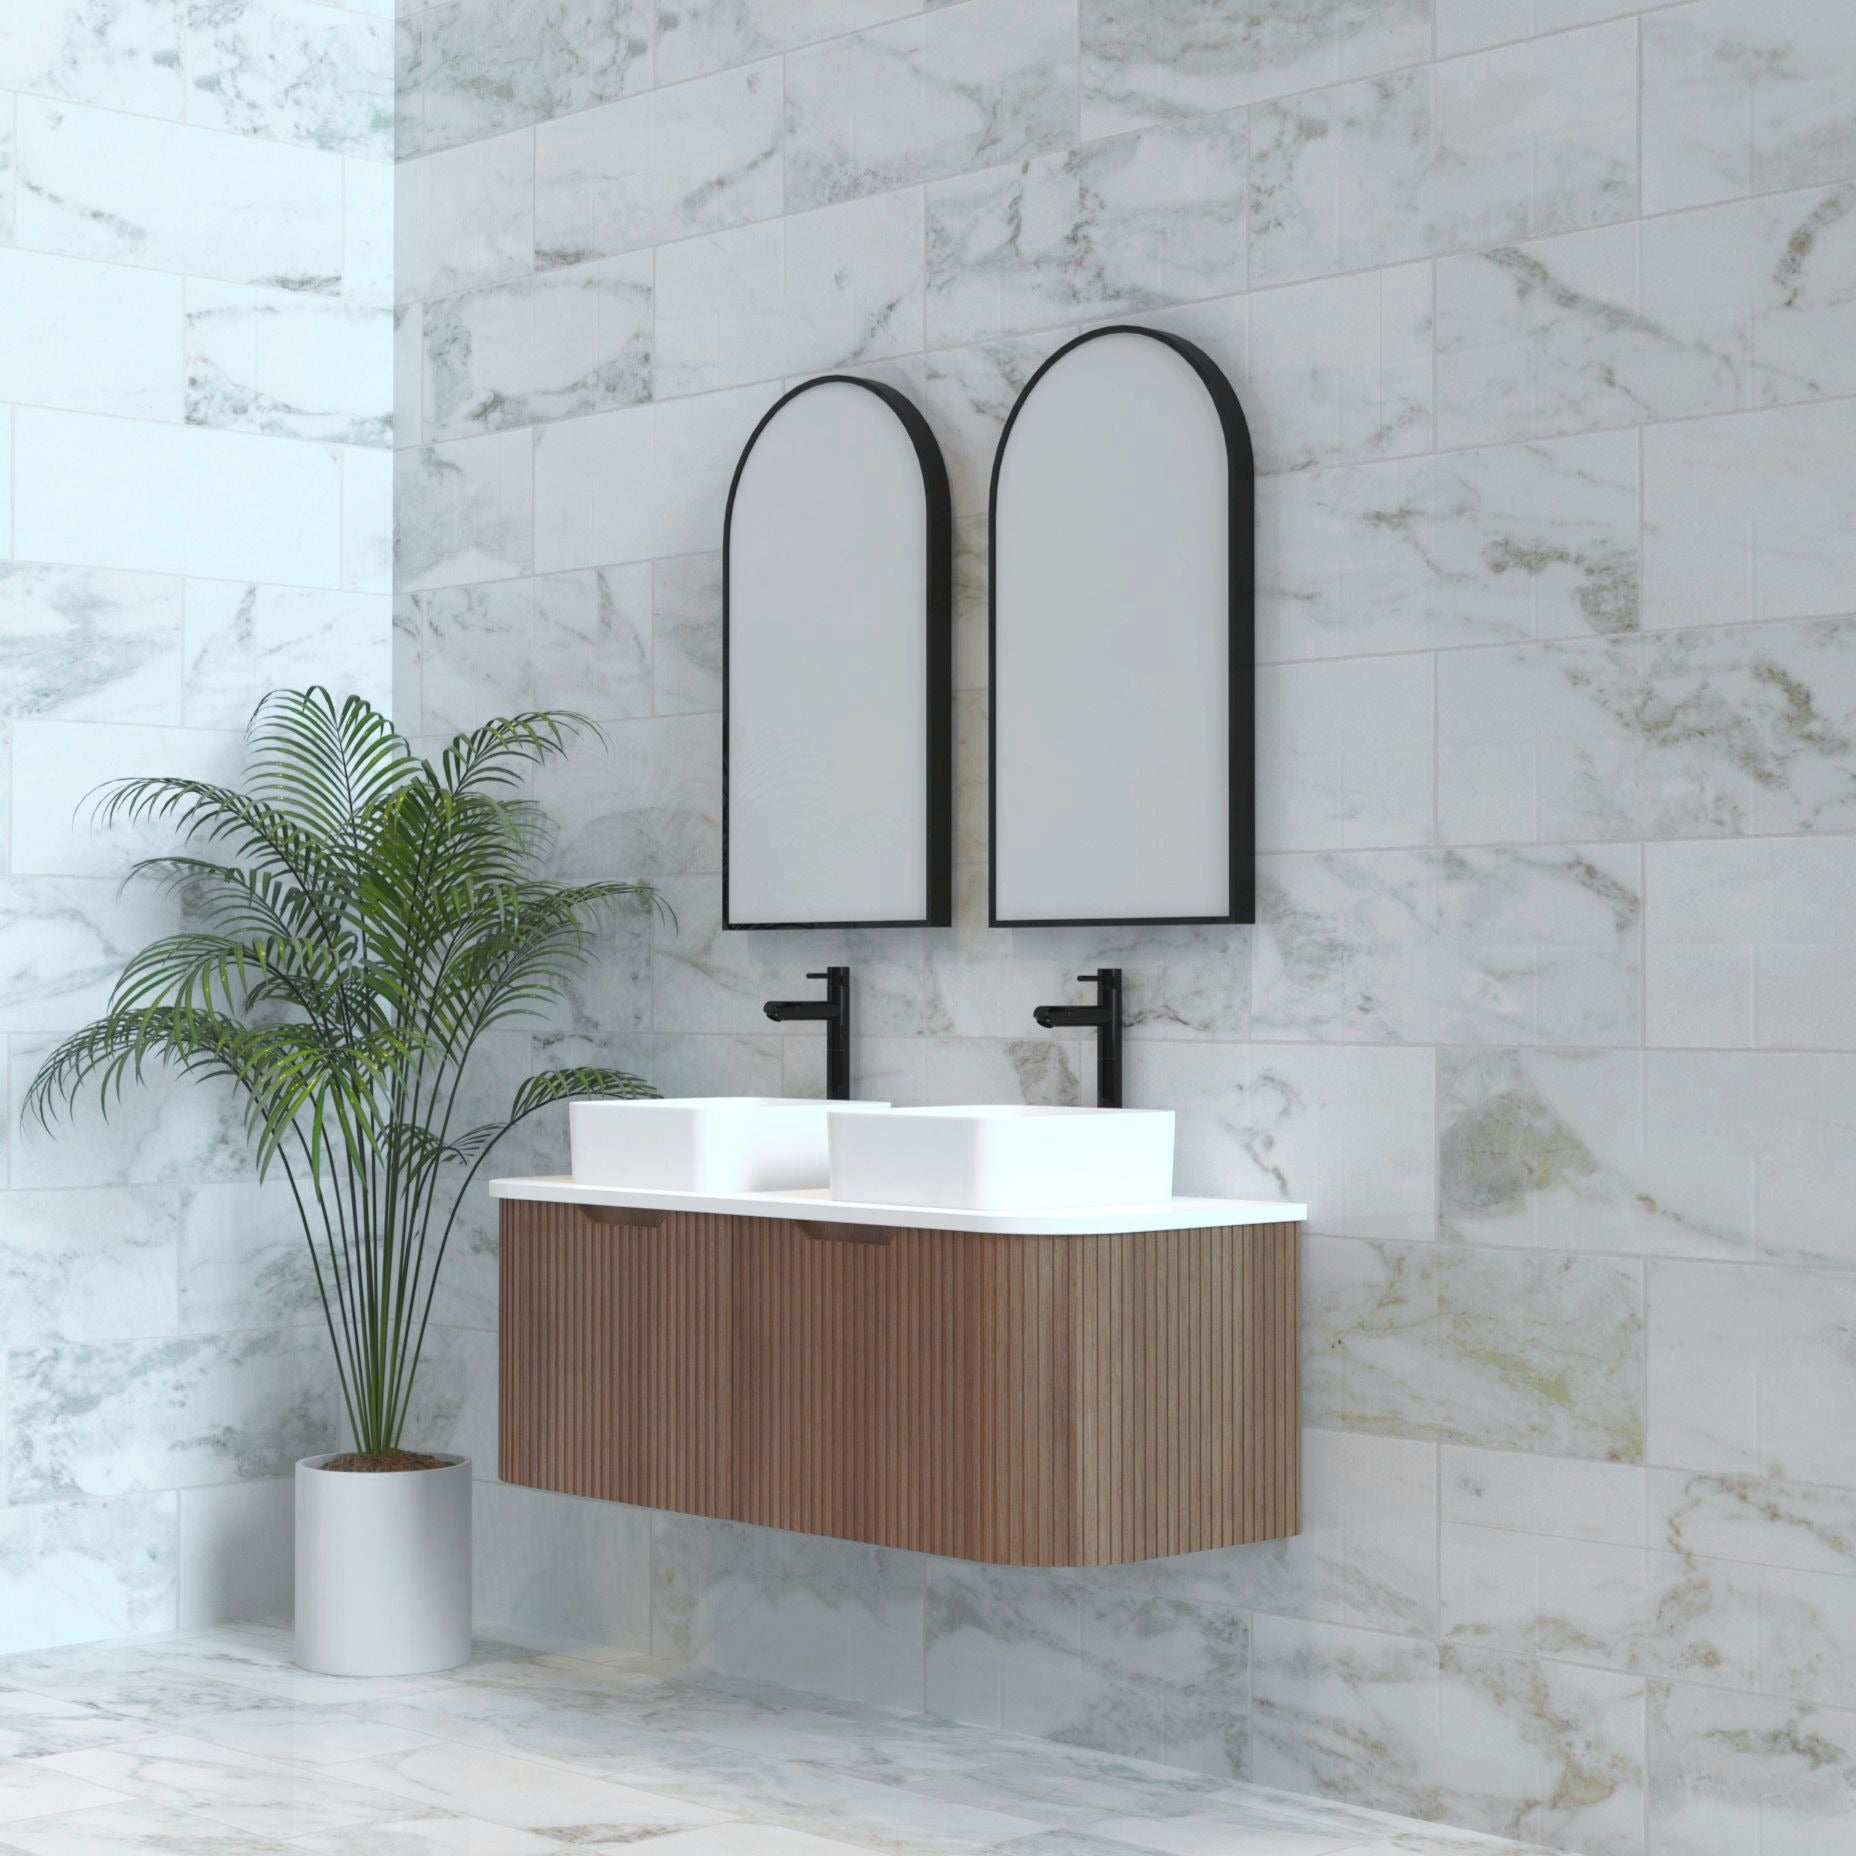 RIVA BERGEN SOLID TIMBER 1200MM DOUBLE BOWL WALL HUNG VANITY